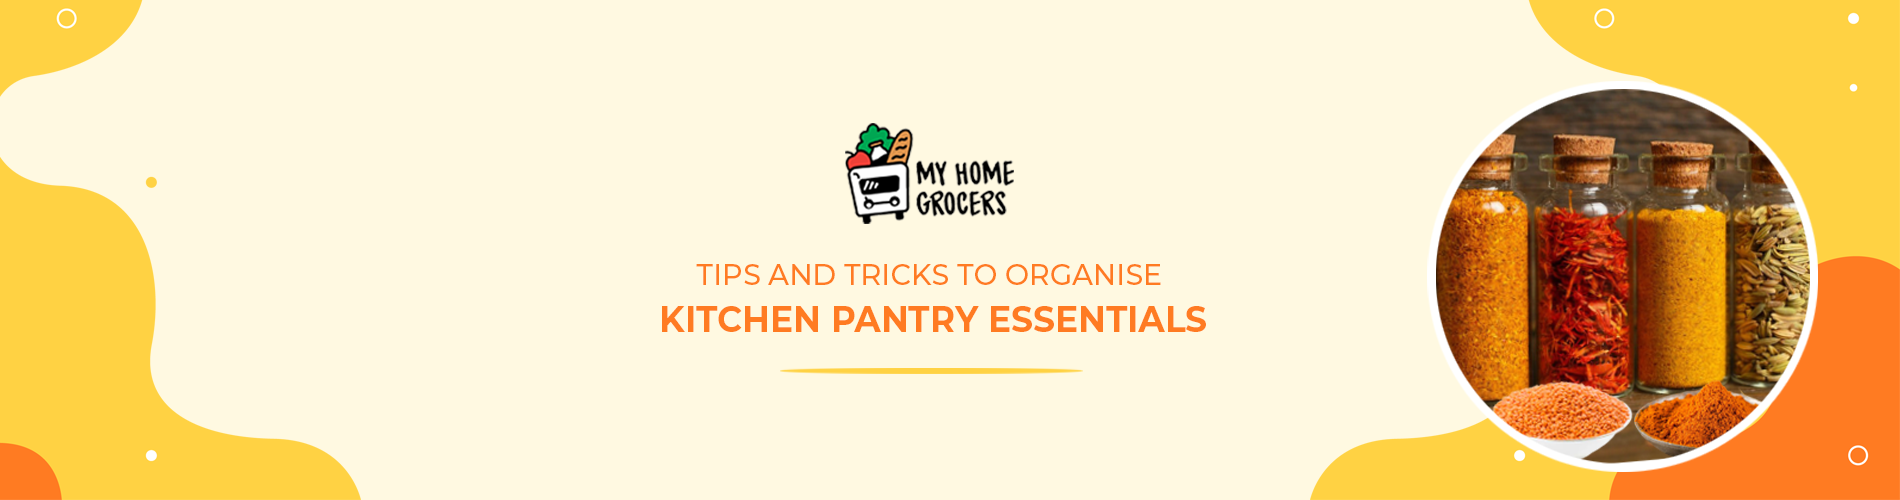 Tips and tricks to organise kitchen pantry essentials